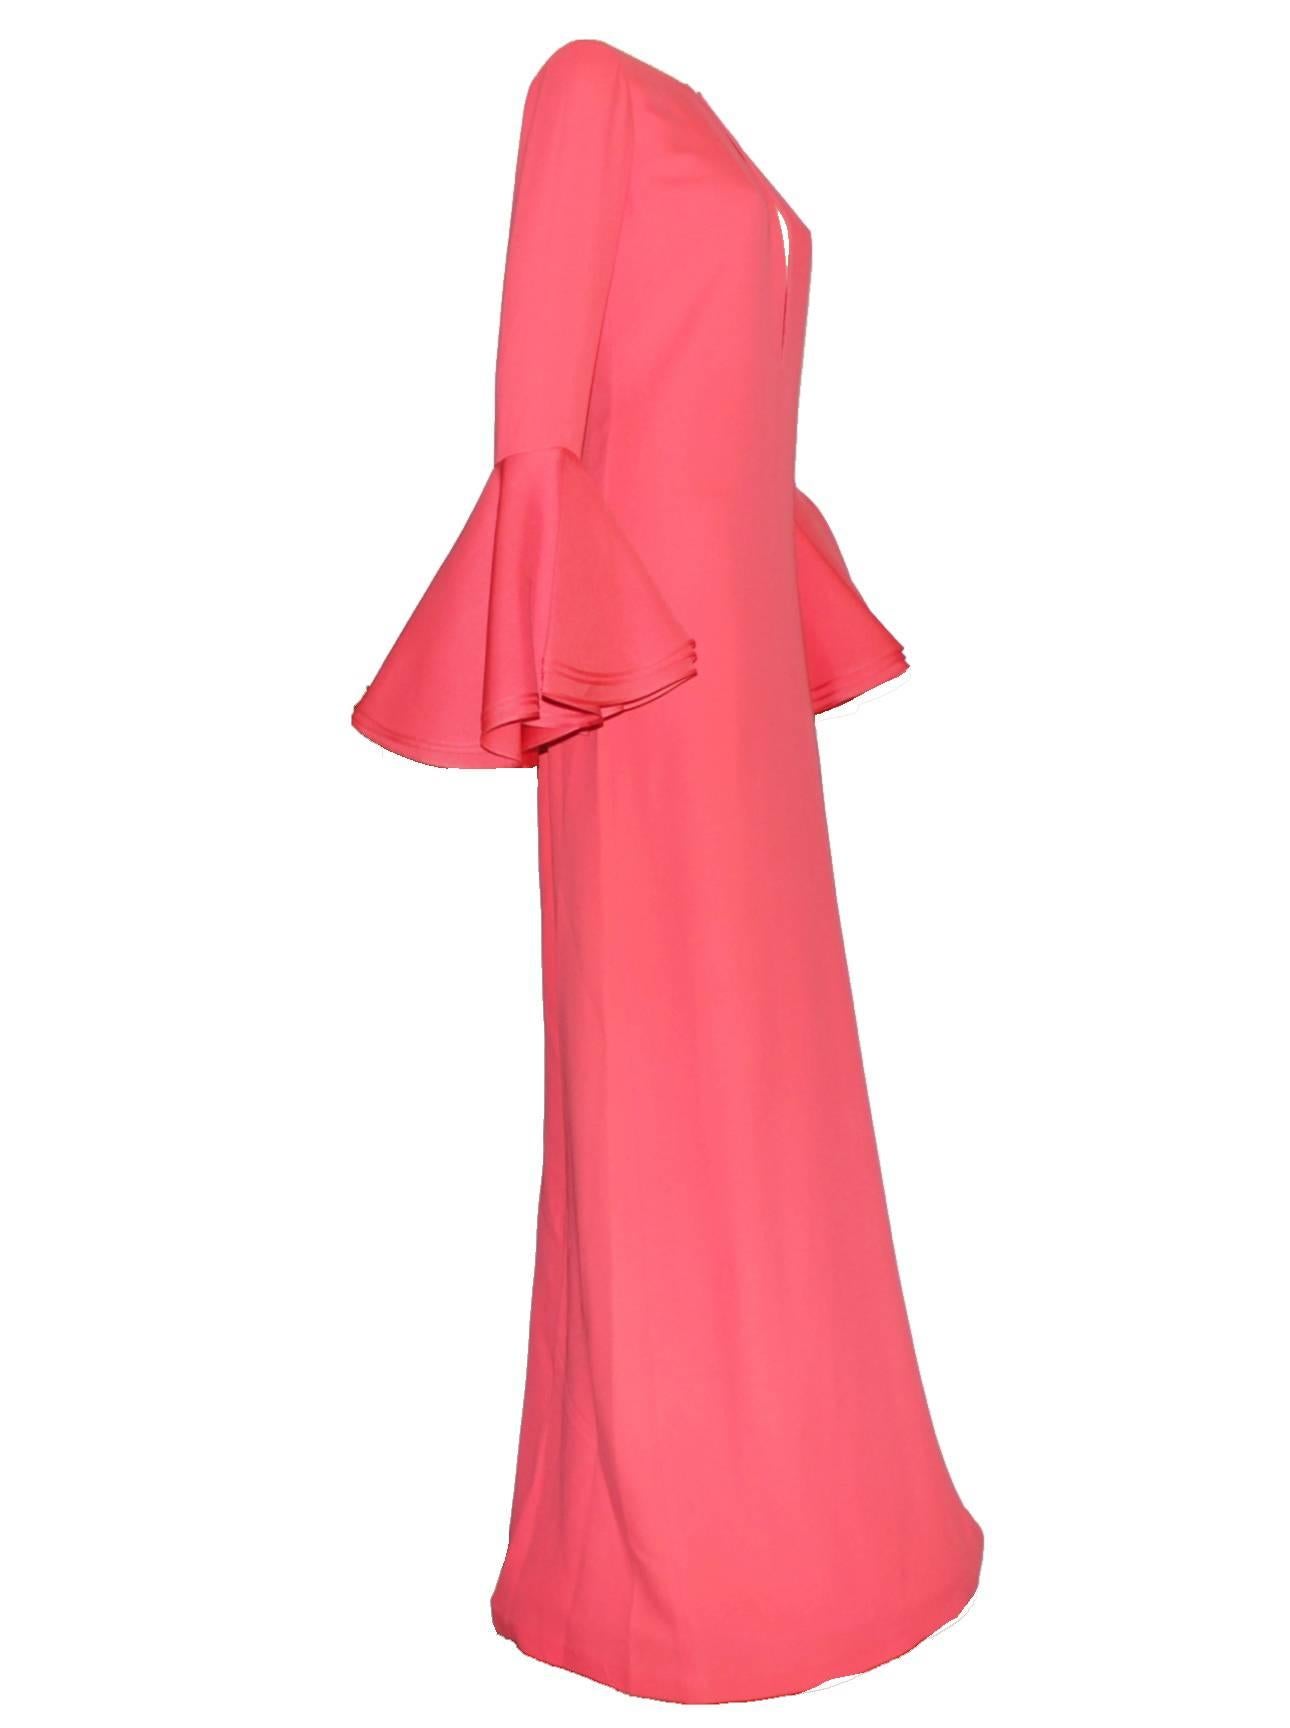 GORGEOUS GUCCI CORAL EVENING GOWN

GRECIAN GODDESS STYLE

SO GLAMOUROUS!

SEEN ON THE RUNWAY AND IN MANY EDITORIALS

IT  WAS SOLD OUT IMMEDIATELY

DETAILS:

    Amazing GUCCI evening gown
    Grecian Goddess style
    Made of finest